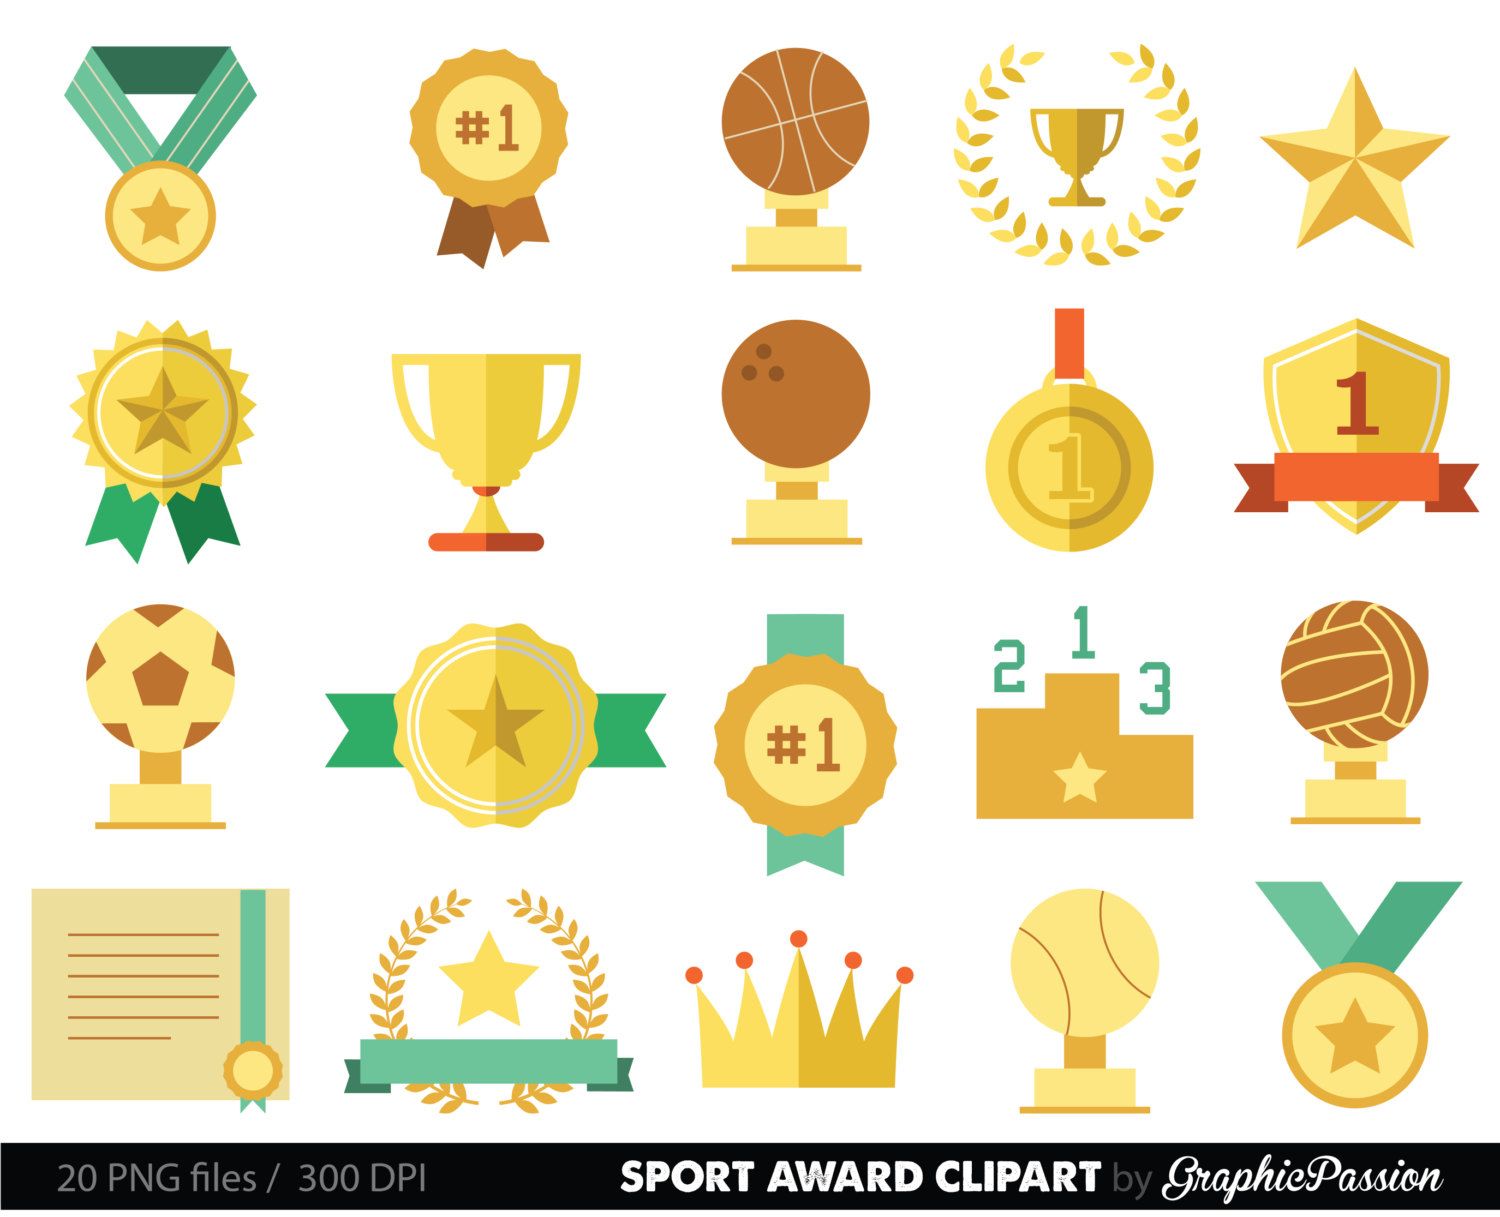 Awards clipart printable. Sports racing prizes flags